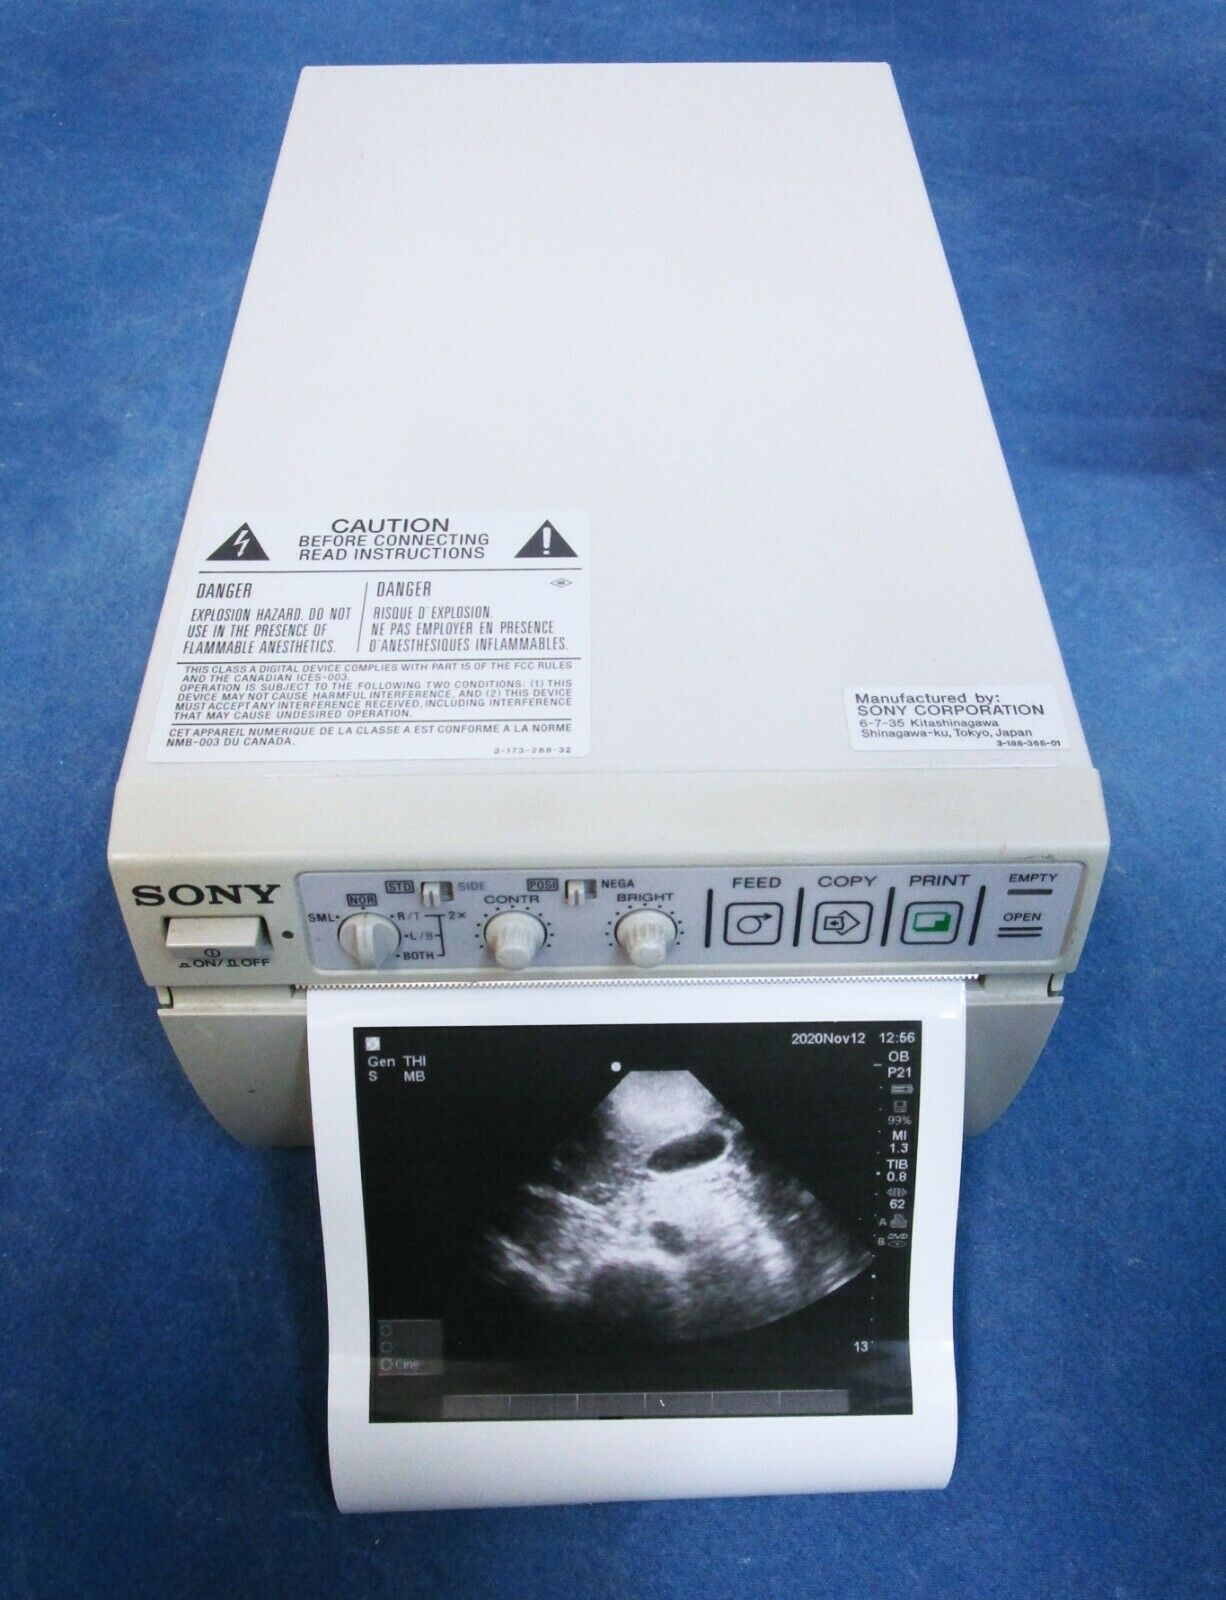 Sonosite M-Turbo Ultrasound System Complete - 60 Day Warranty DIAGNOSTIC ULTRASOUND MACHINES FOR SALE